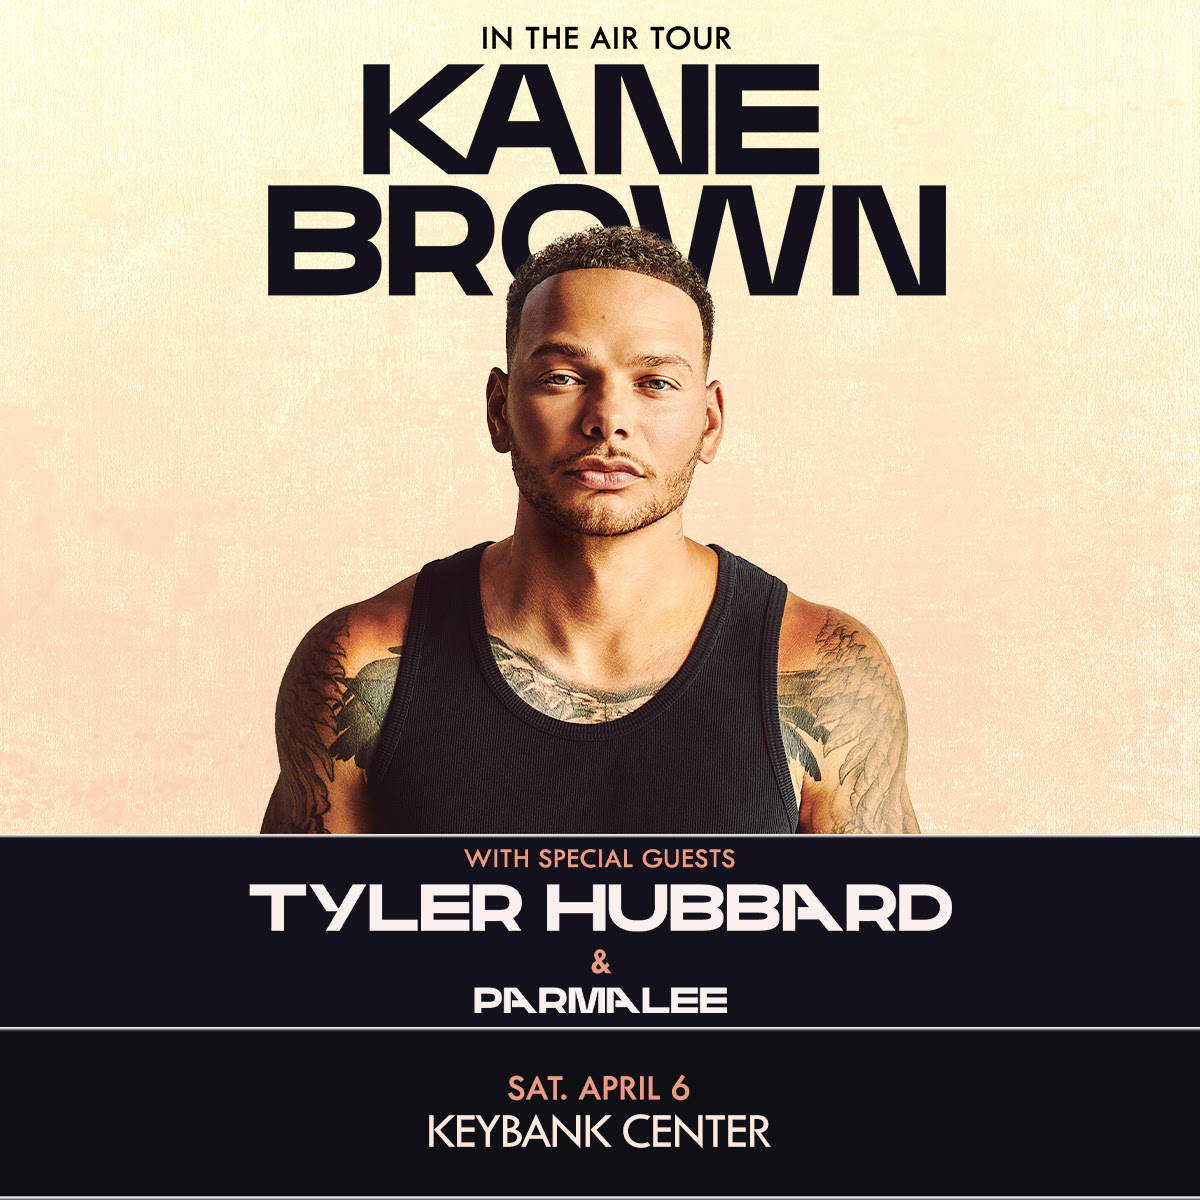 Kane Brown image courtesy of KeyBank Center Public Relations